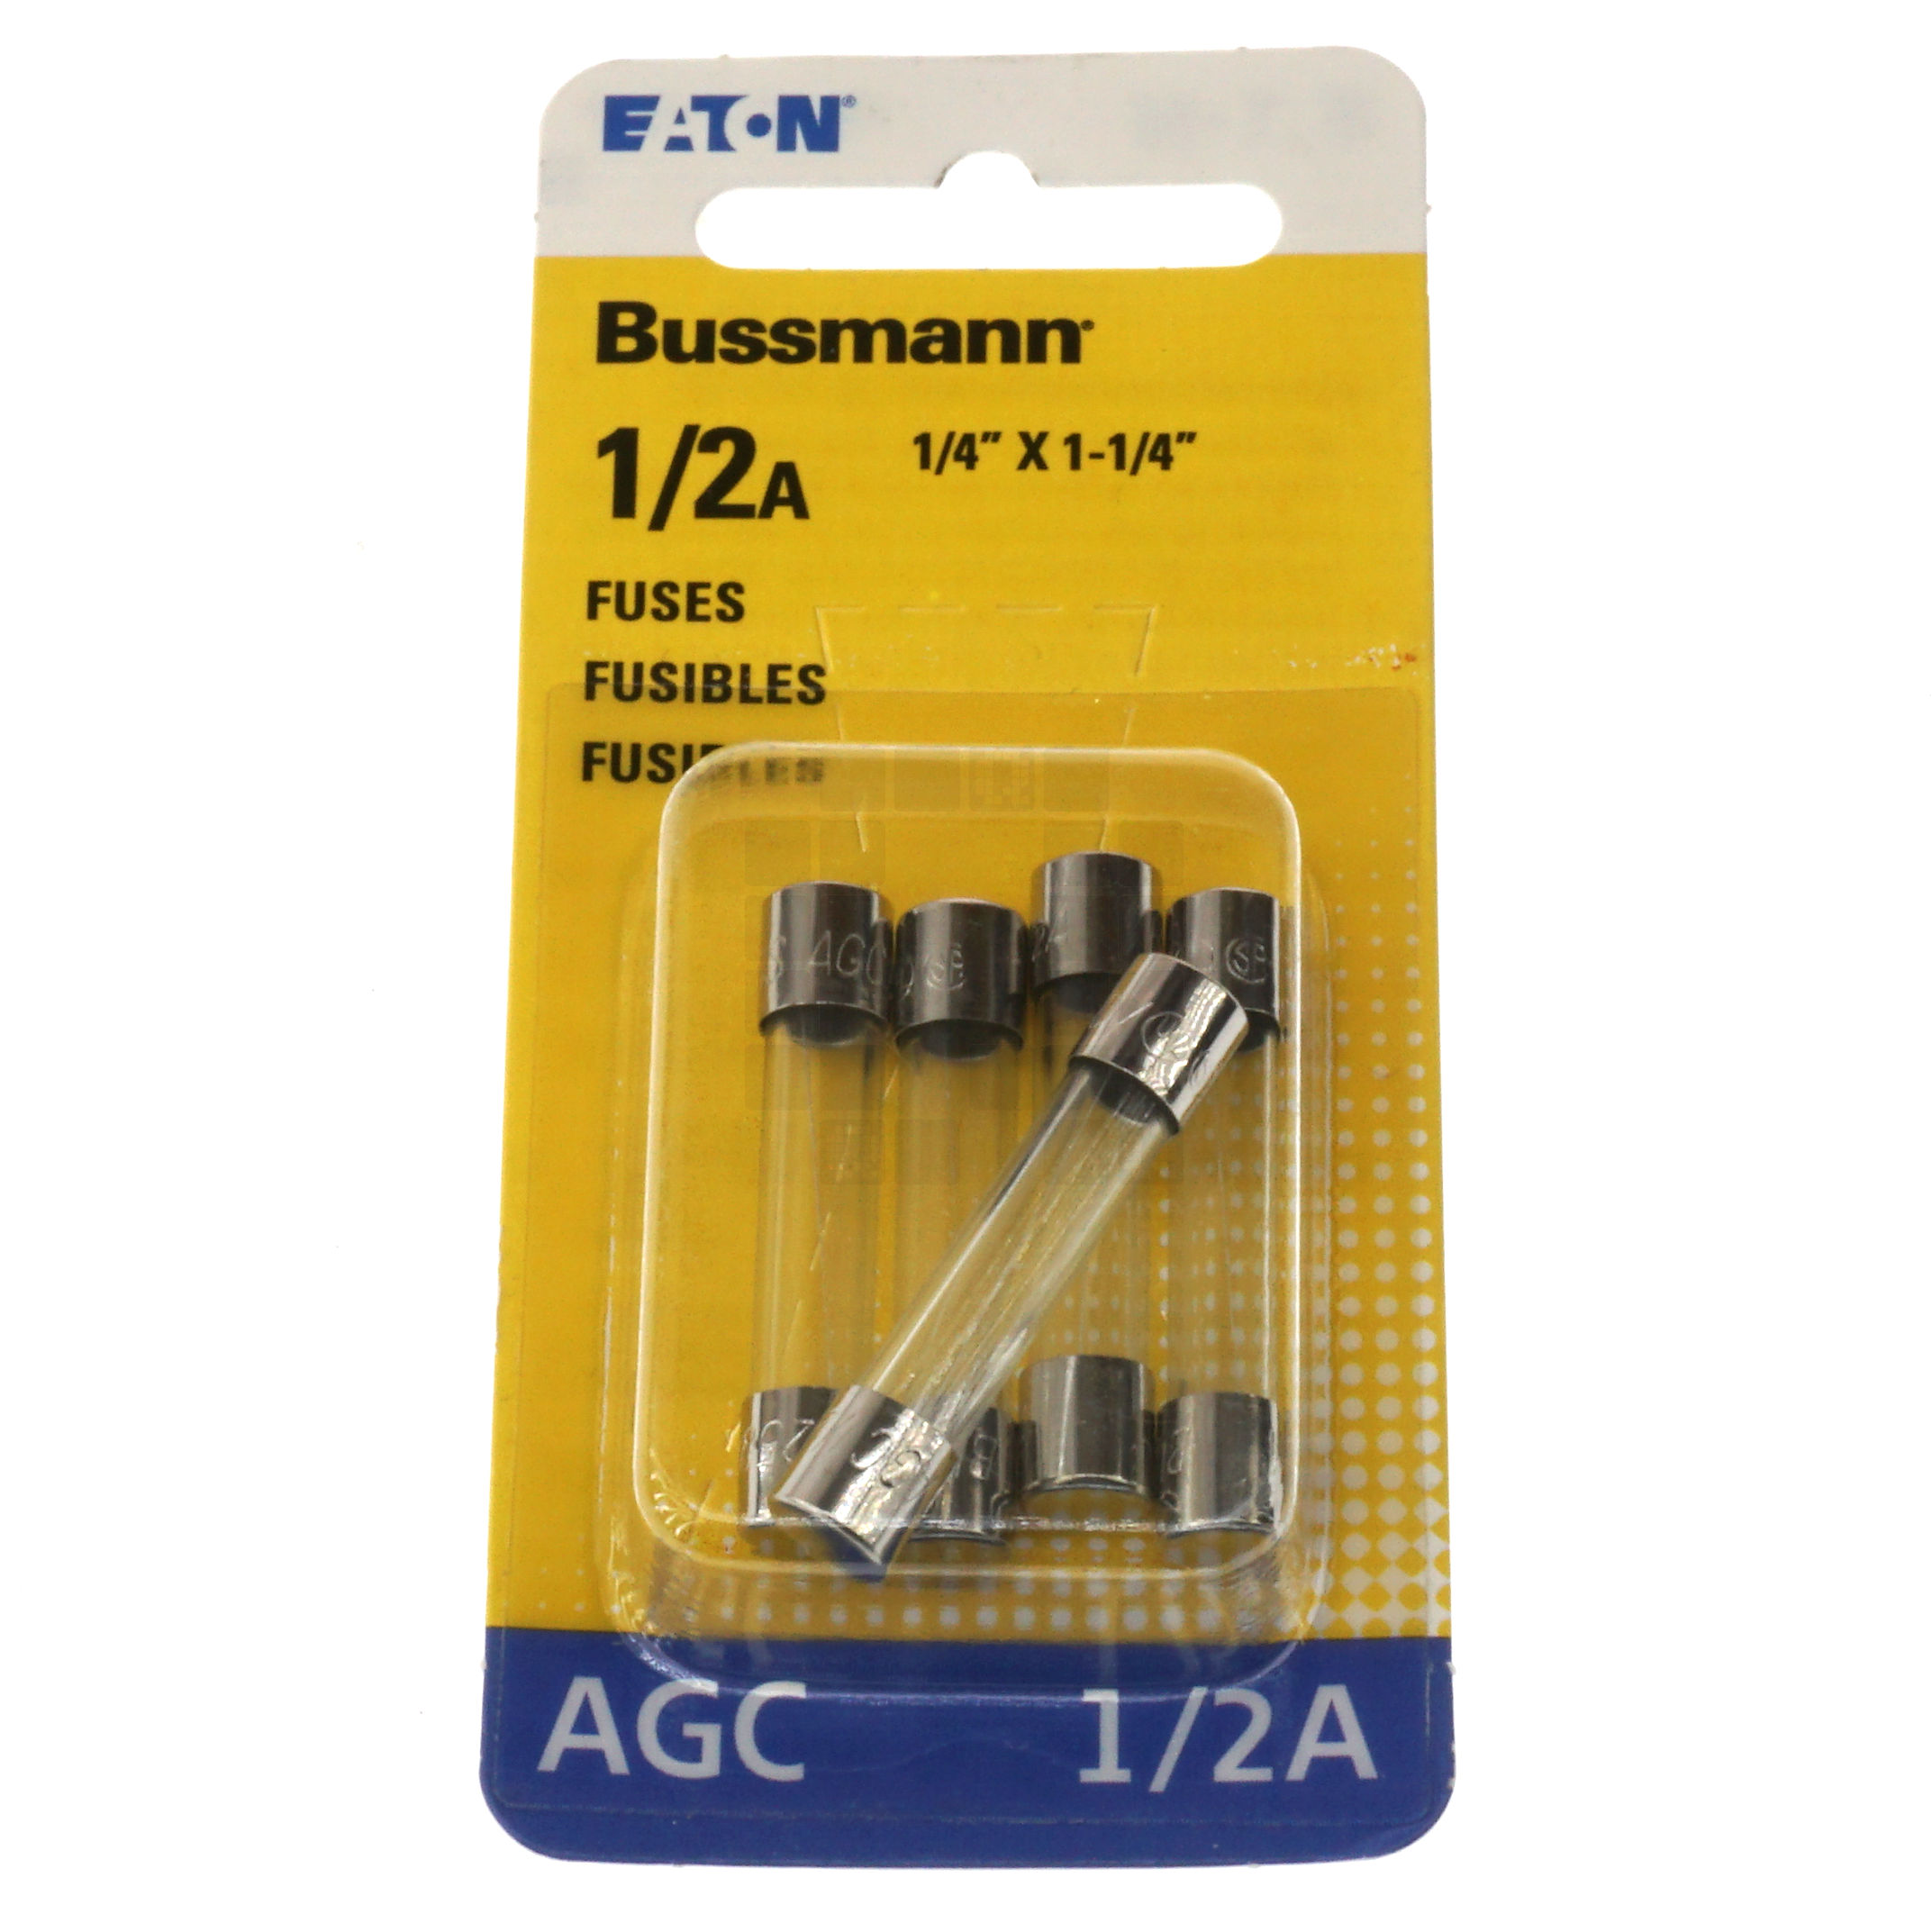 Eaton Bussman BP/AGC-1/2-RP Fast Acting Glass Fuse 5 Pack, 1/2 Amp, 250VAC